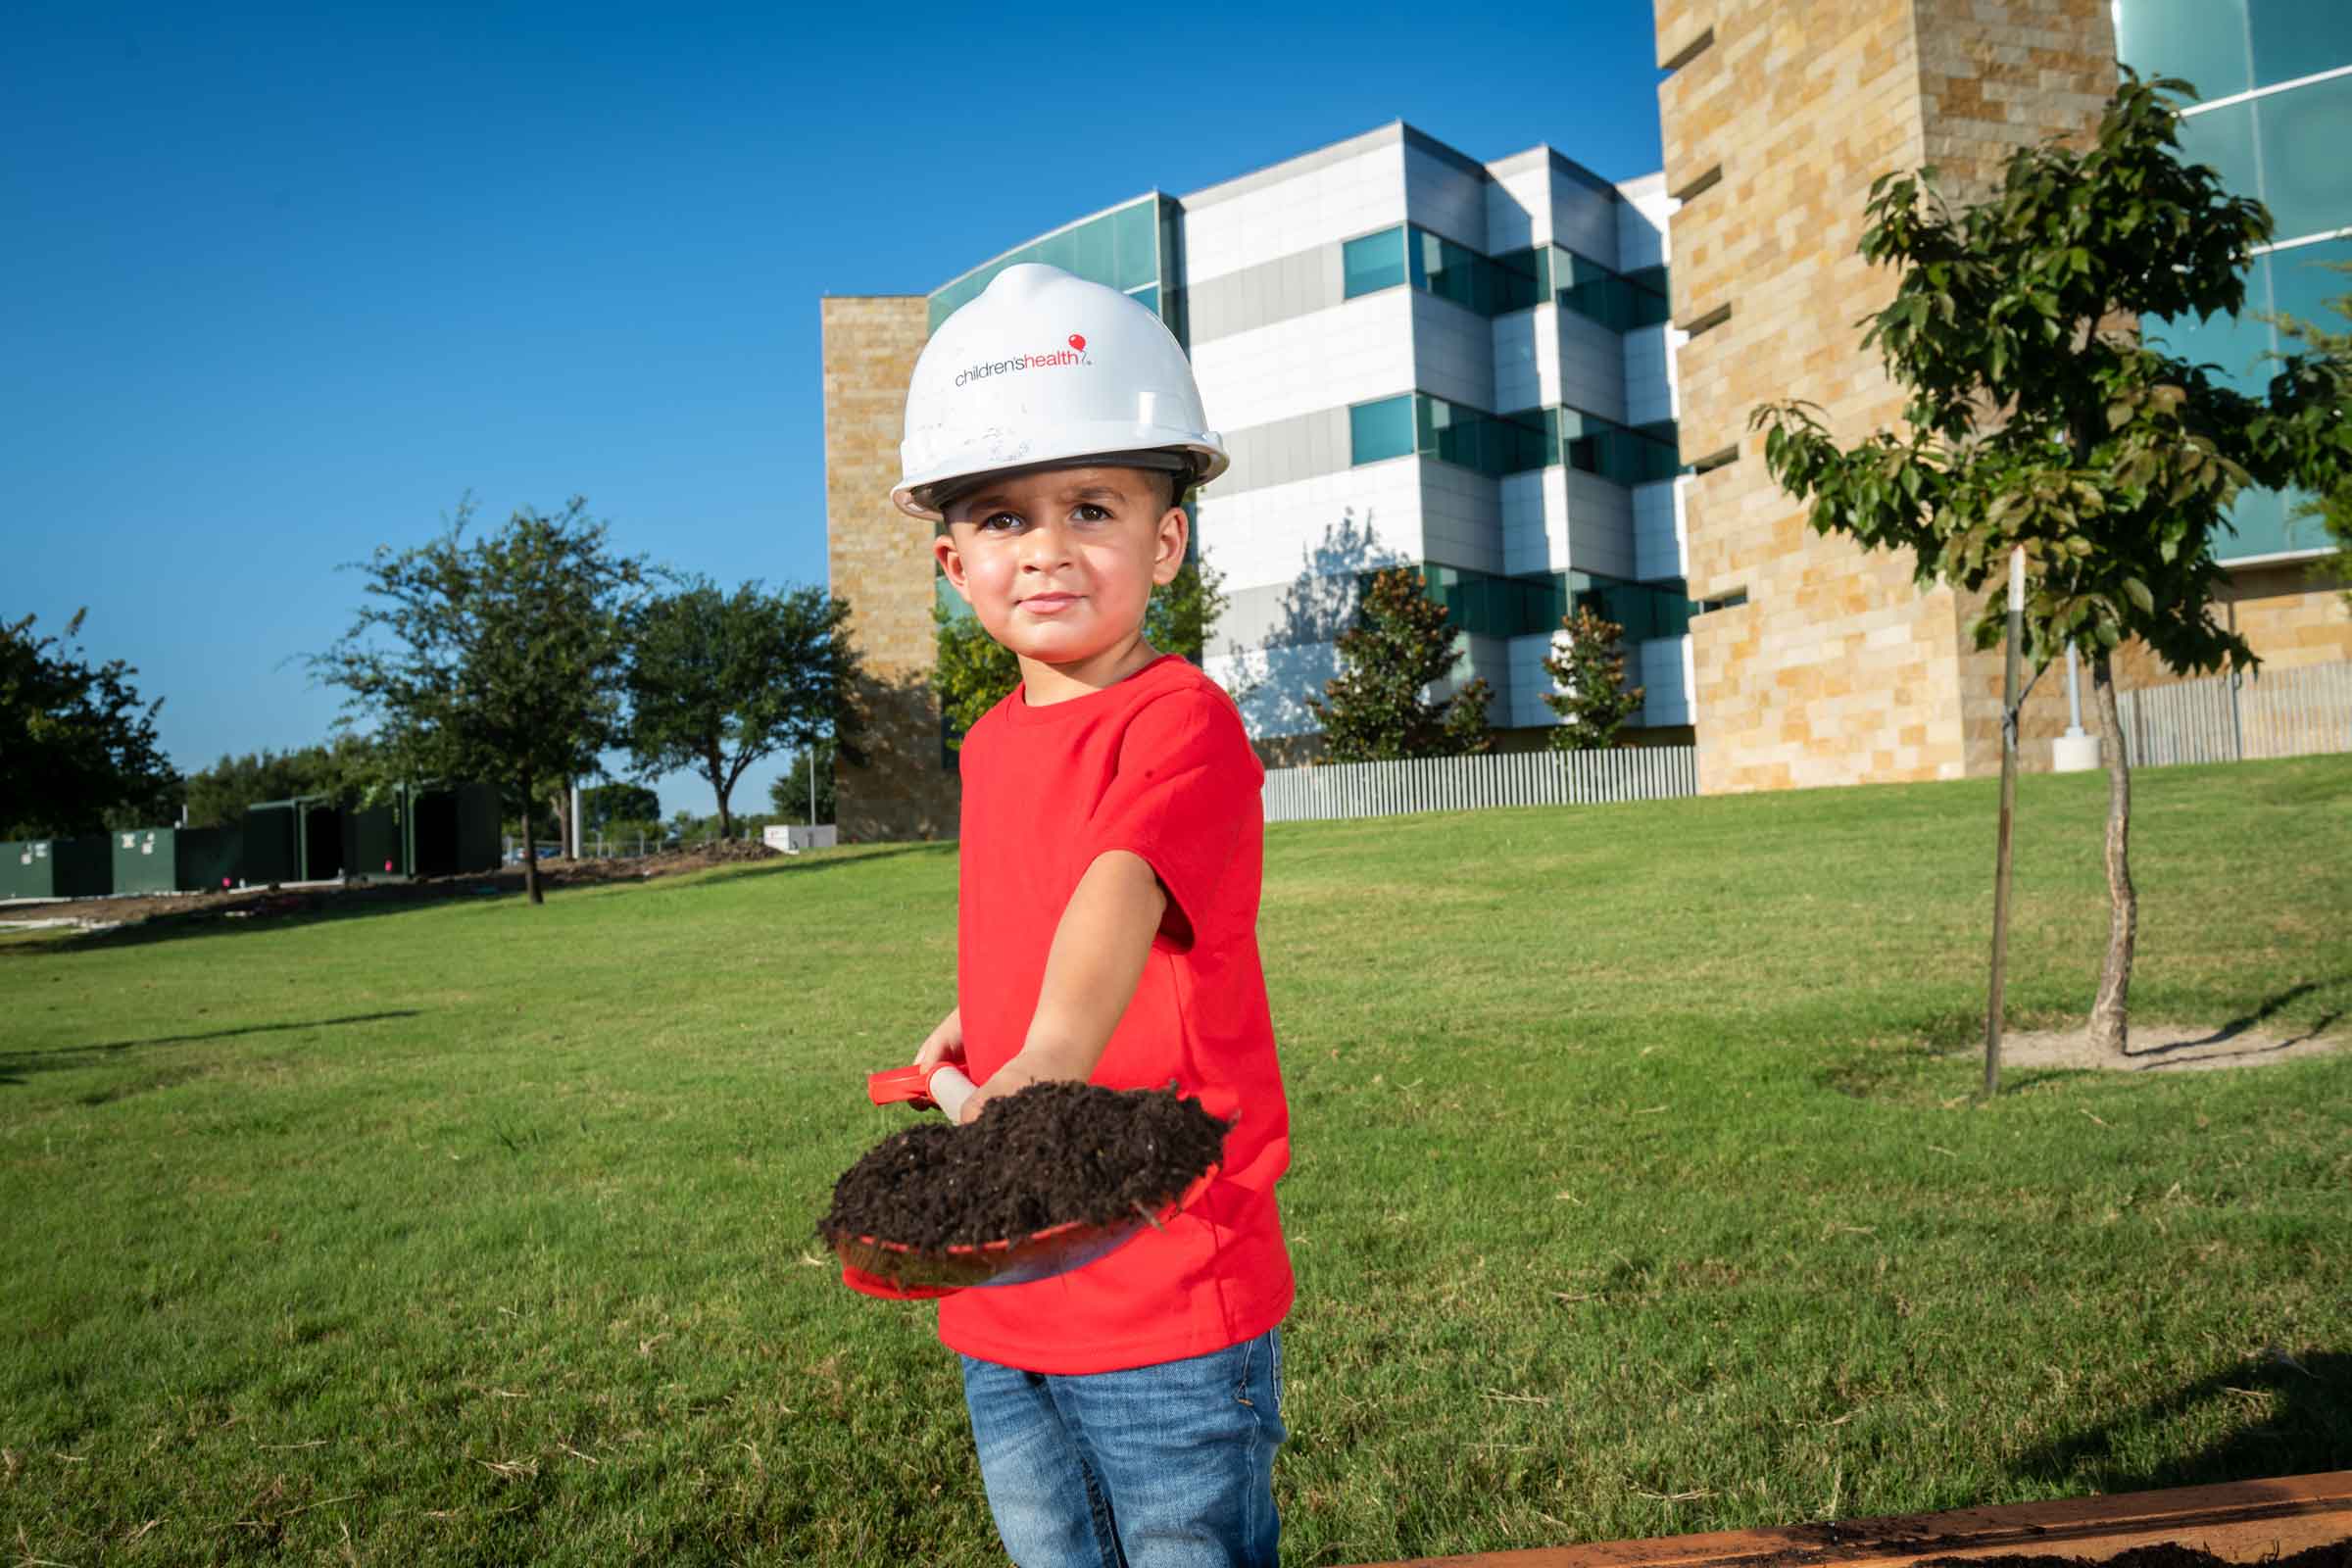 A child holds a shovel full of dirt at a groundbreaking ceremony